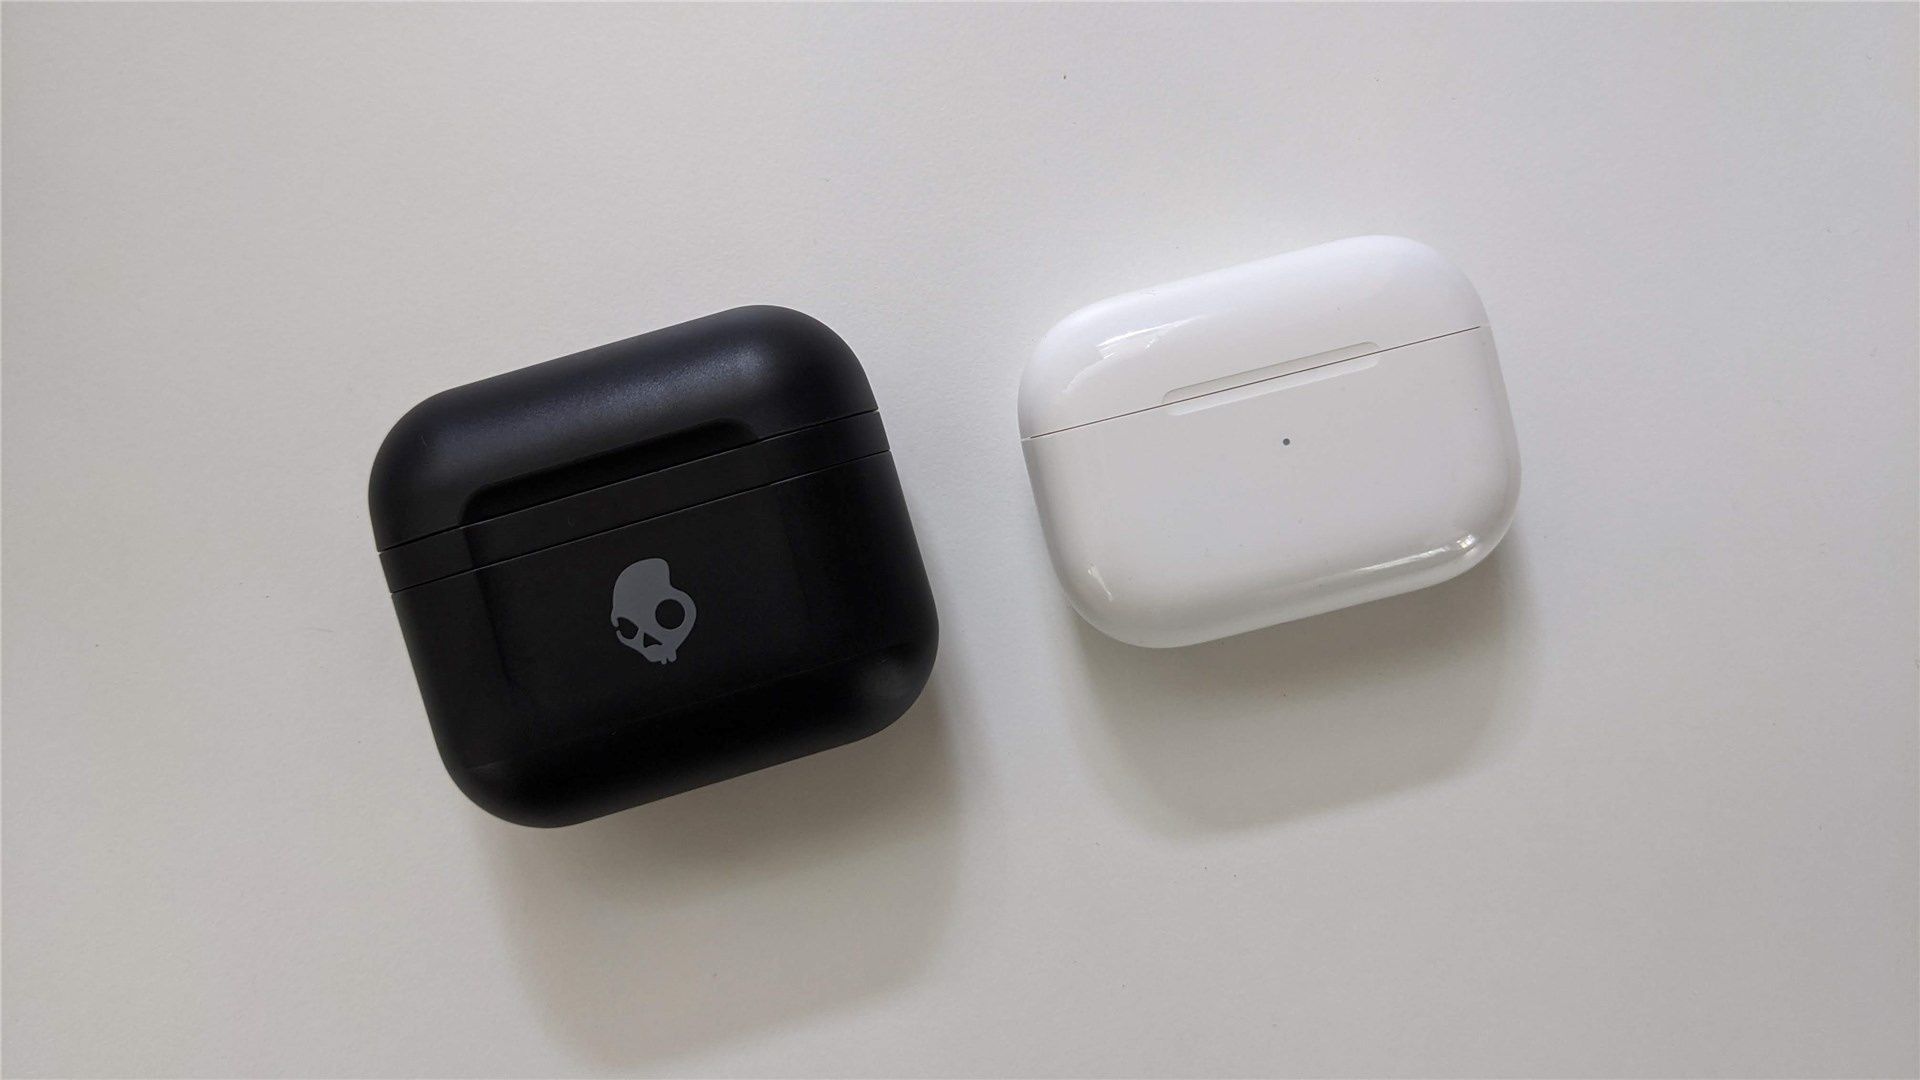 The Skullcandy Indy Fuel case next to the AirPods Pro case